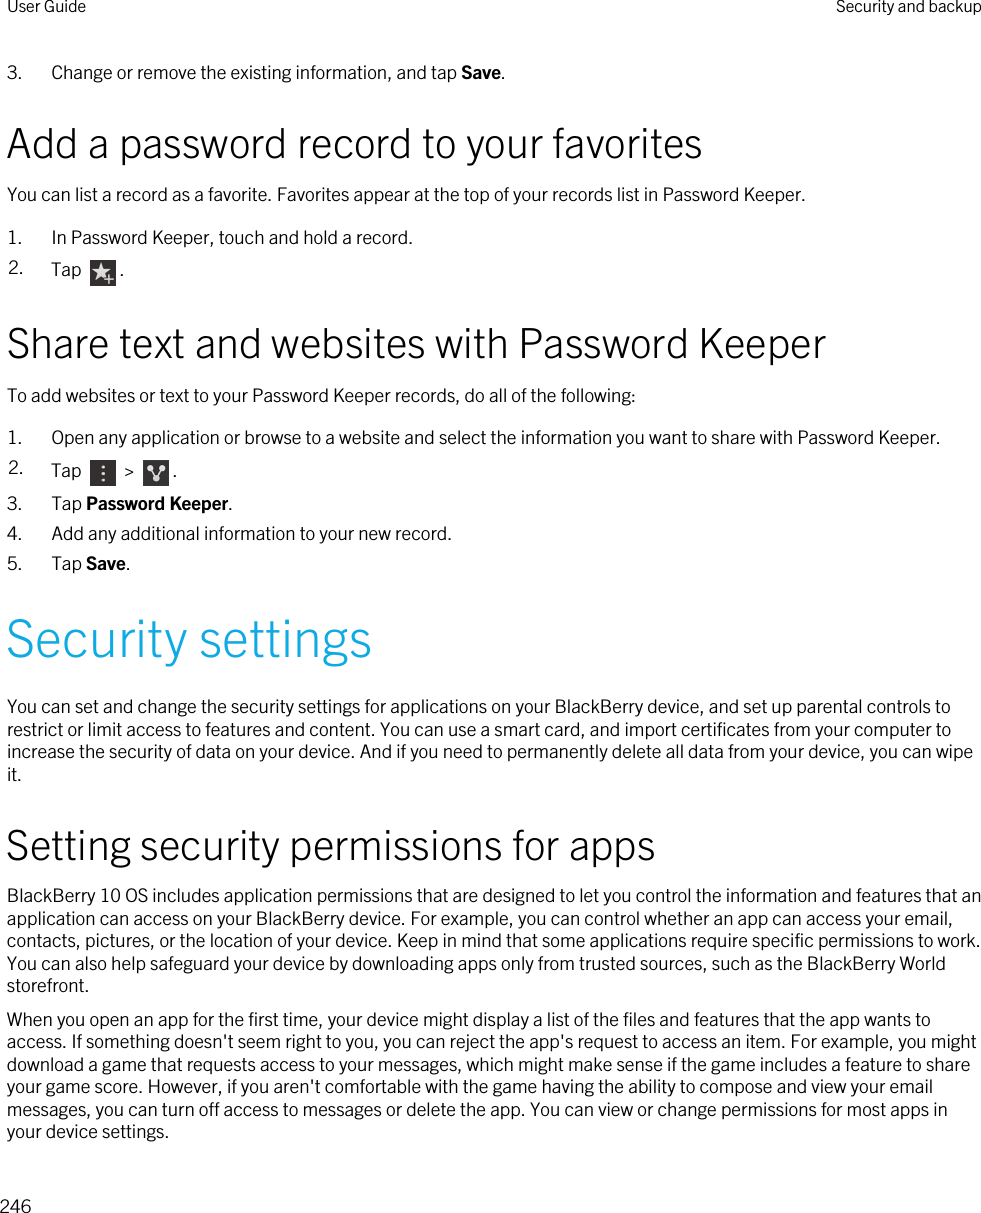 3. Change or remove the existing information, and tap Save.Add a password record to your favoritesYou can list a record as a favorite. Favorites appear at the top of your records list in Password Keeper.1. In Password Keeper, touch and hold a record.2. Tap  .Share text and websites with Password KeeperTo add websites or text to your Password Keeper records, do all of the following:1. Open any application or browse to a website and select the information you want to share with Password Keeper.2. Tap   &gt;  .3. Tap Password Keeper.4. Add any additional information to your new record.5. Tap Save.Security settingsYou can set and change the security settings for applications on your BlackBerry device, and set up parental controls to restrict or limit access to features and content. You can use a smart card, and import certificates from your computer to increase the security of data on your device. And if you need to permanently delete all data from your device, you can wipe it.Setting security permissions for appsBlackBerry 10 OS includes application permissions that are designed to let you control the information and features that an application can access on your BlackBerry device. For example, you can control whether an app can access your email, contacts, pictures, or the location of your device. Keep in mind that some applications require specific permissions to work. You can also help safeguard your device by downloading apps only from trusted sources, such as the BlackBerry World storefront.When you open an app for the first time, your device might display a list of the files and features that the app wants to access. If something doesn&apos;t seem right to you, you can reject the app&apos;s request to access an item. For example, you might download a game that requests access to your messages, which might make sense if the game includes a feature to share your game score. However, if you aren&apos;t comfortable with the game having the ability to compose and view your email messages, you can turn off access to messages or delete the app. You can view or change permissions for most apps in your device settings.User Guide Security and backup246